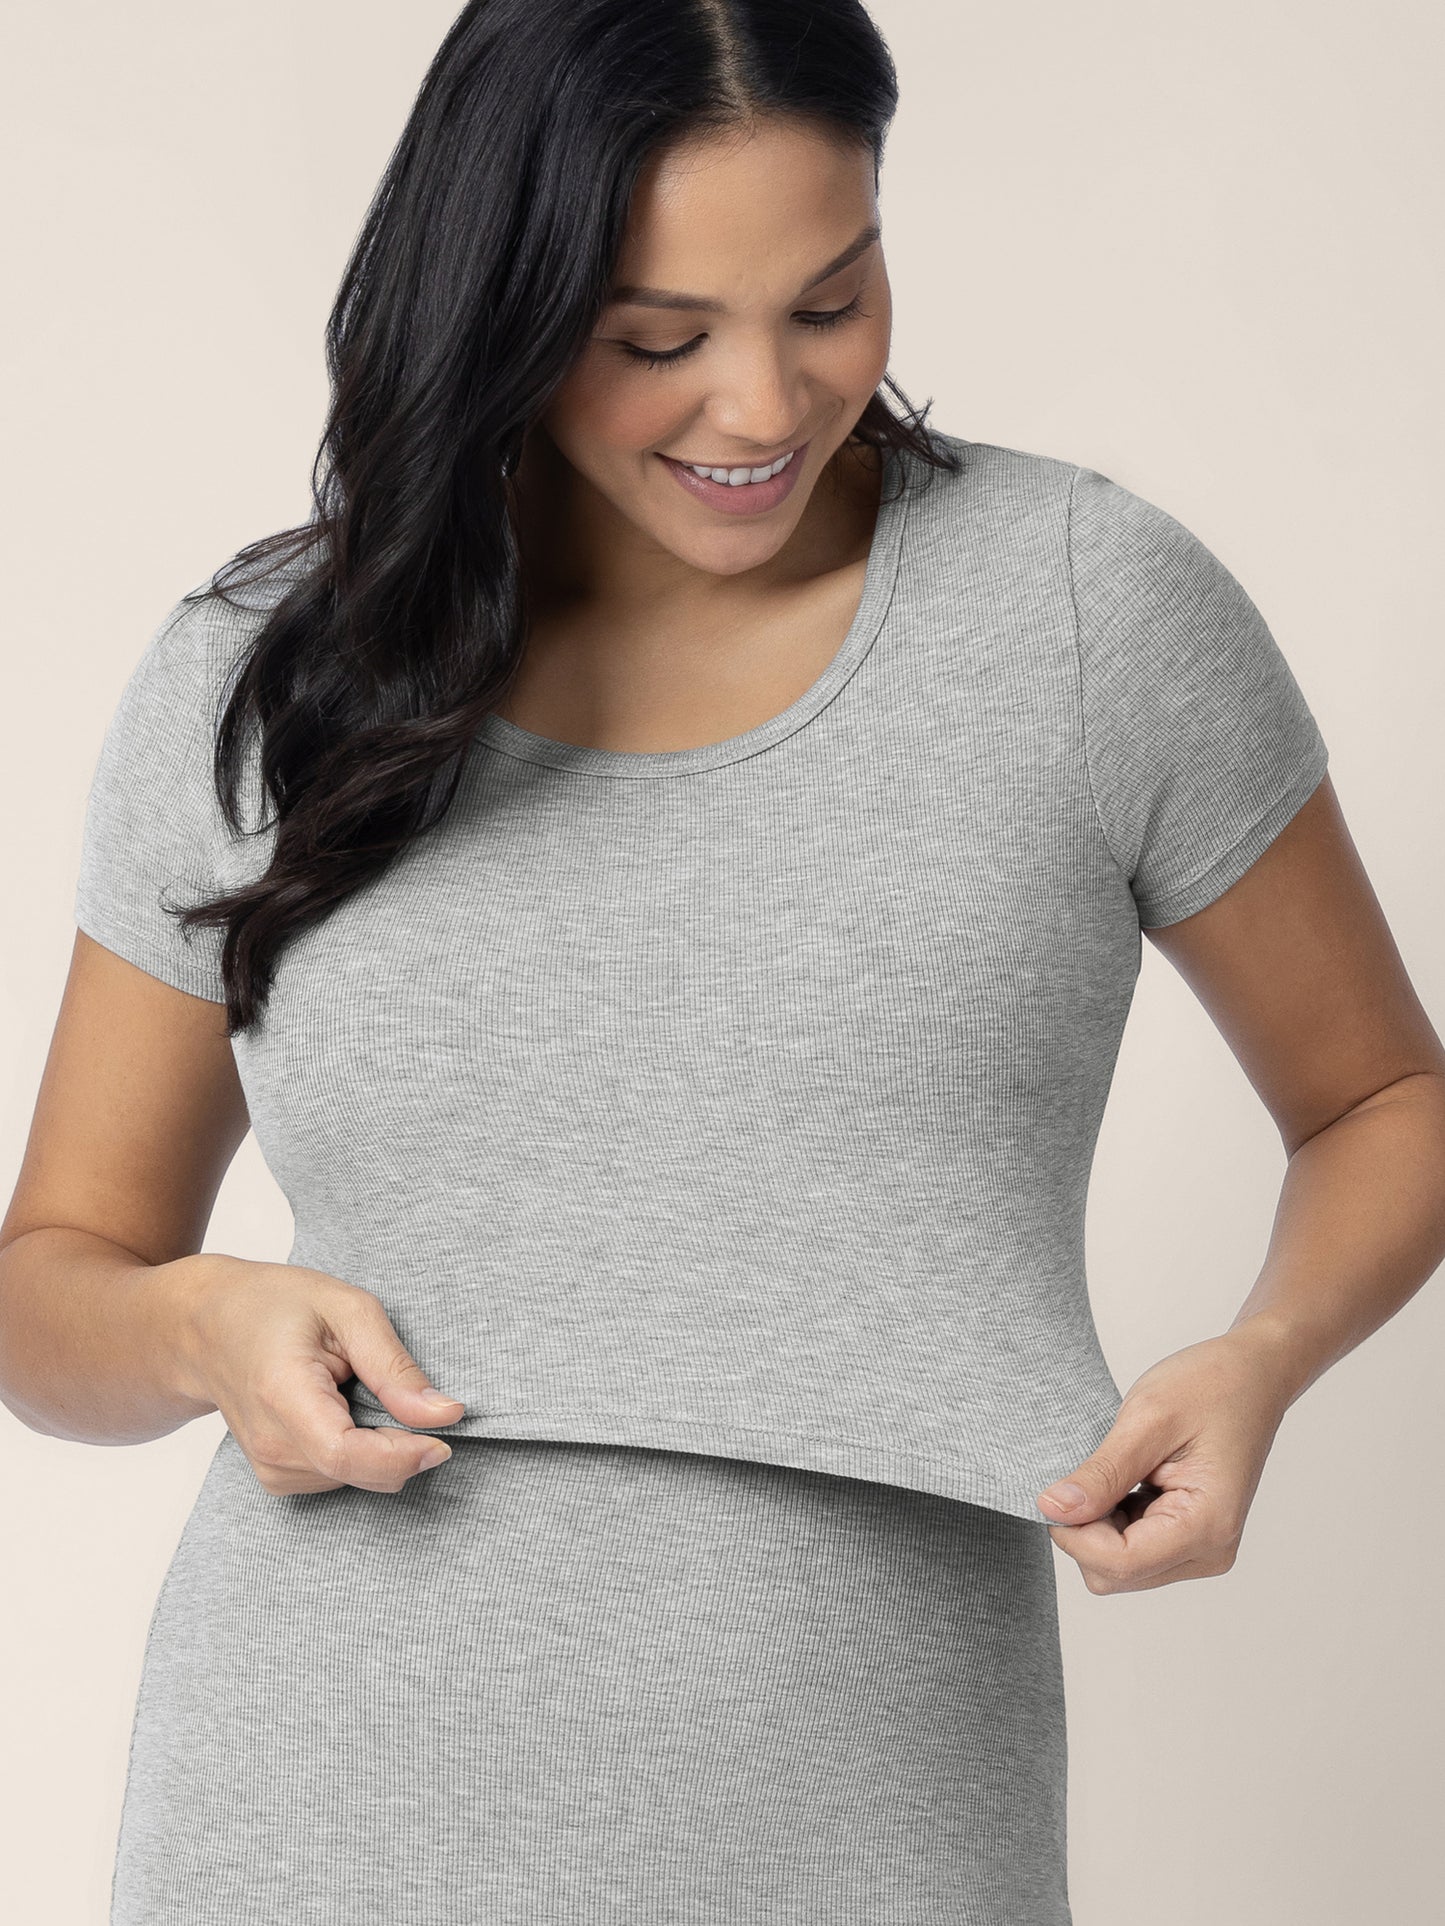 Model wearing the Olivia Ribbed Bamboo 2-in-1 Maternity & Nursing Dress in Grey Heather, showing the removable crop top nursing panel